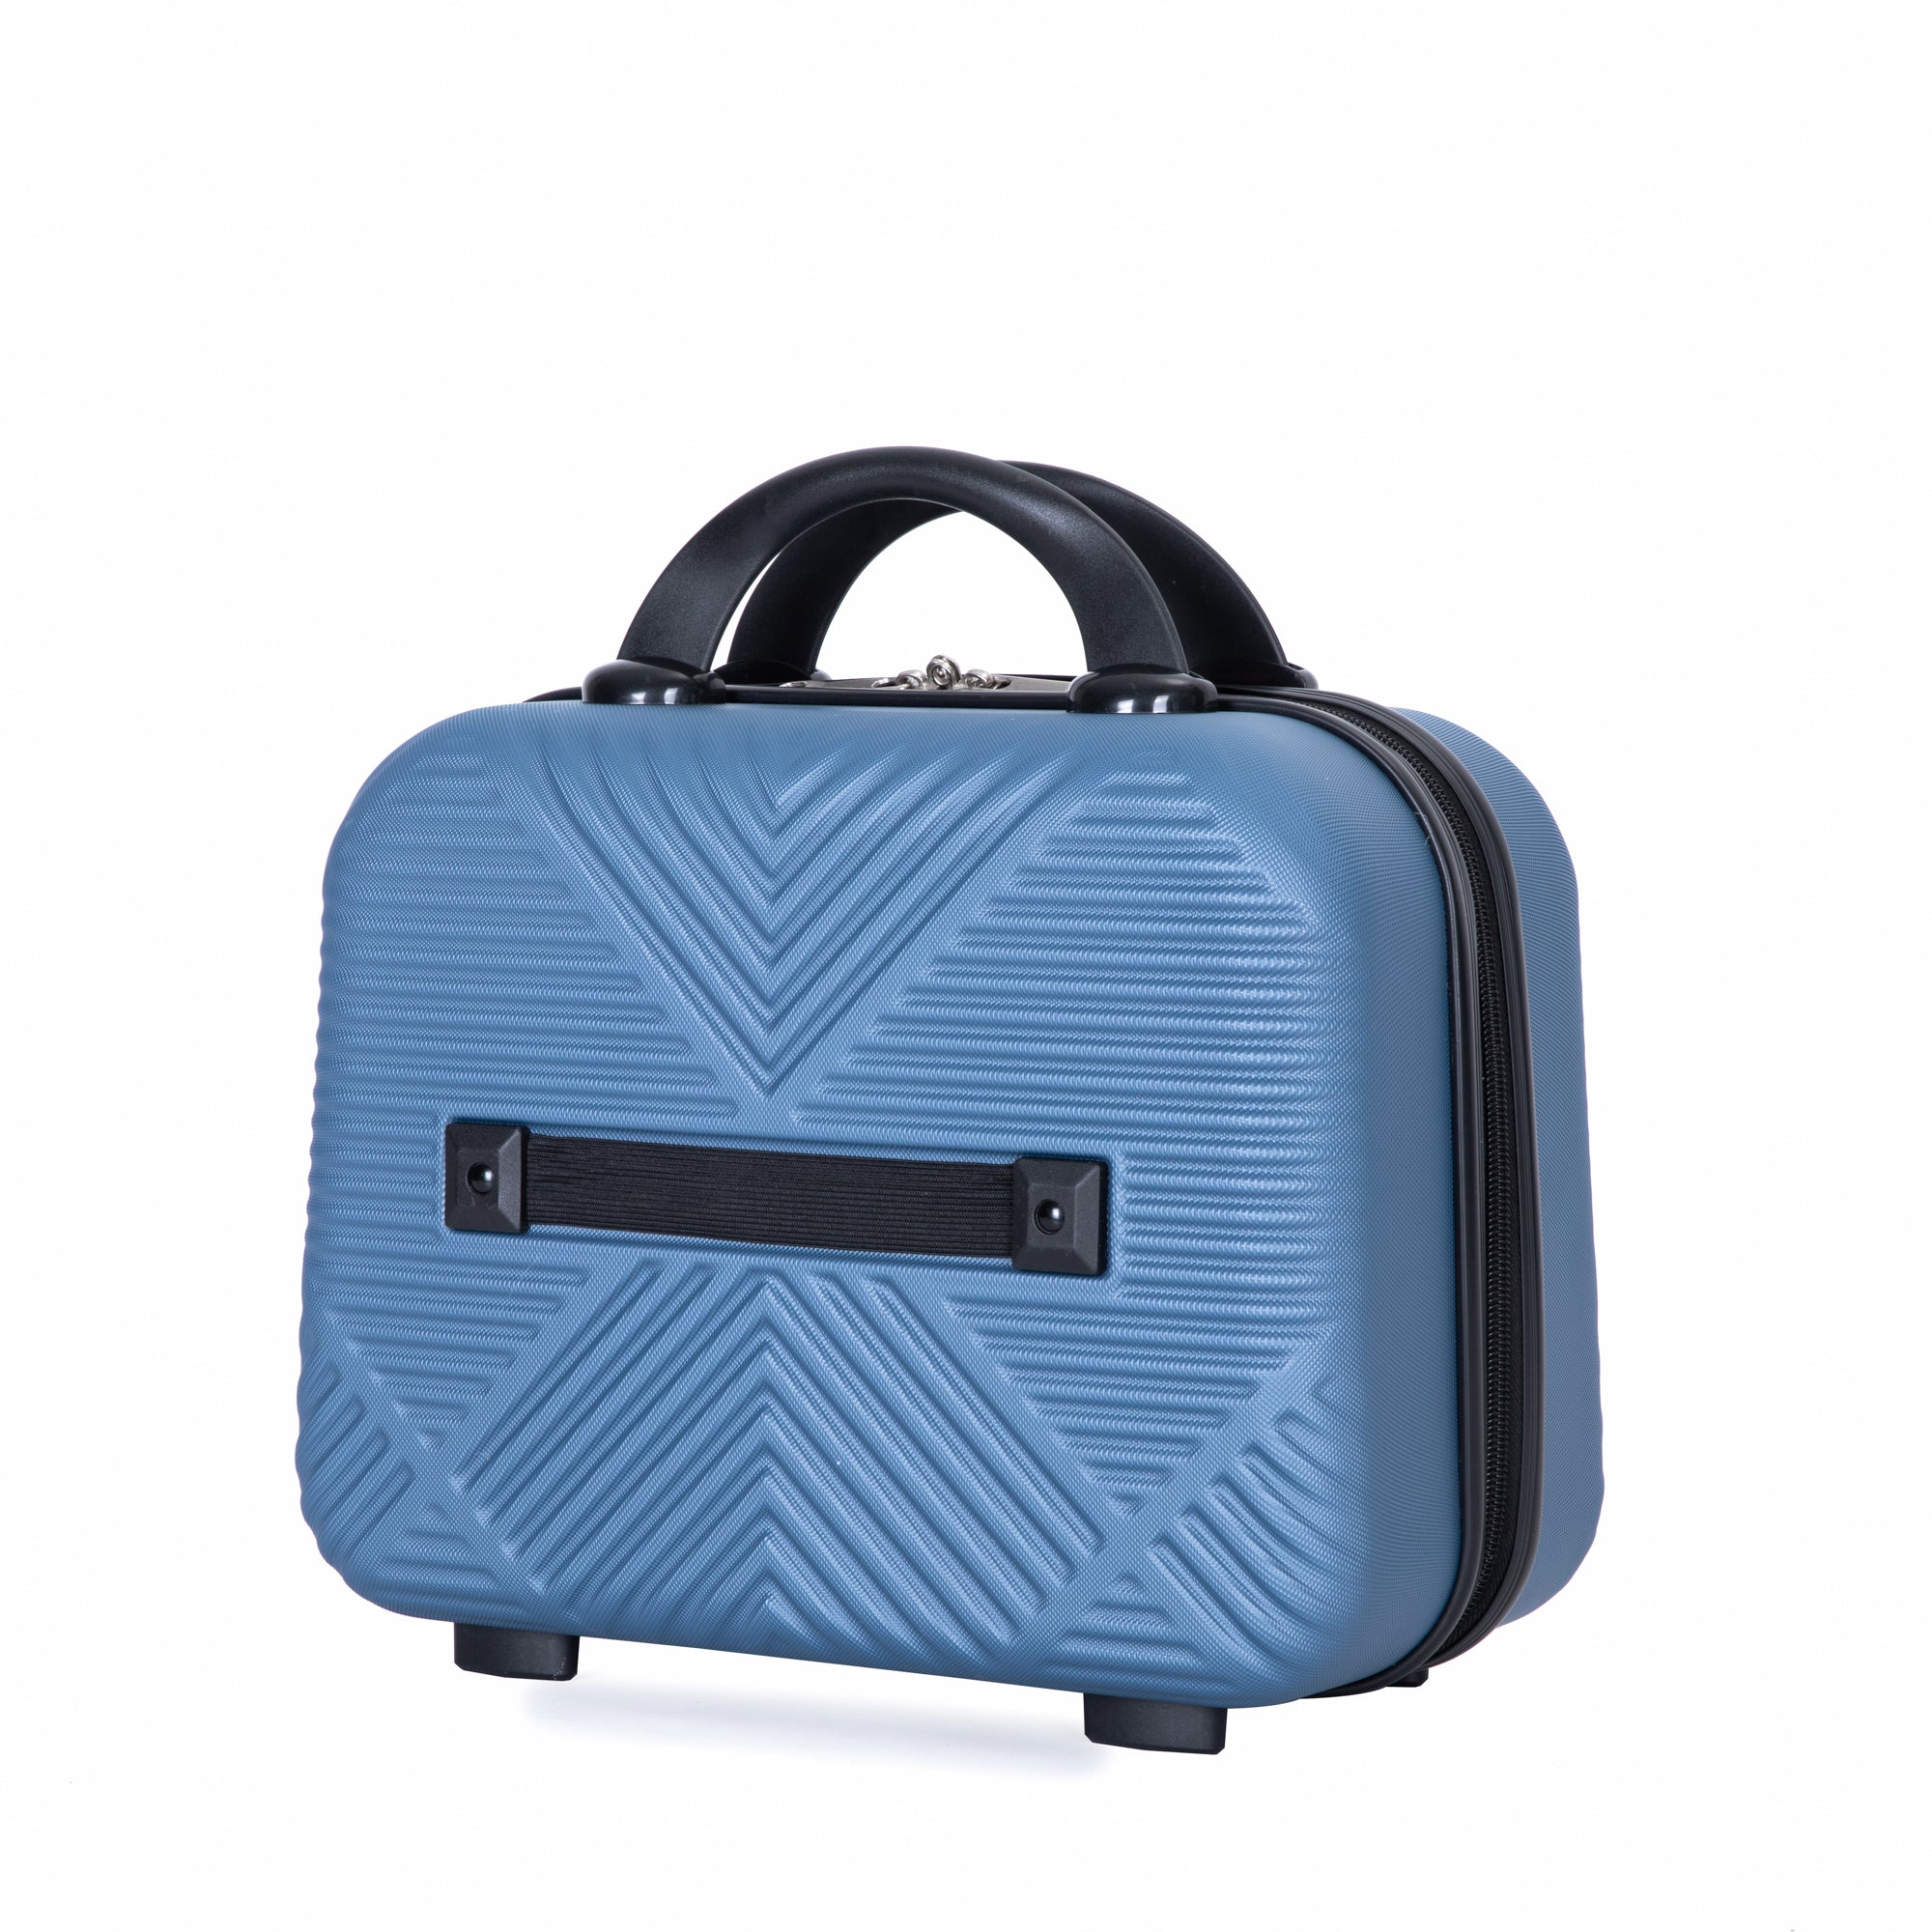 2Piece Luggage Sets ABS Lightweight Suitcase , Spinner blue-abs